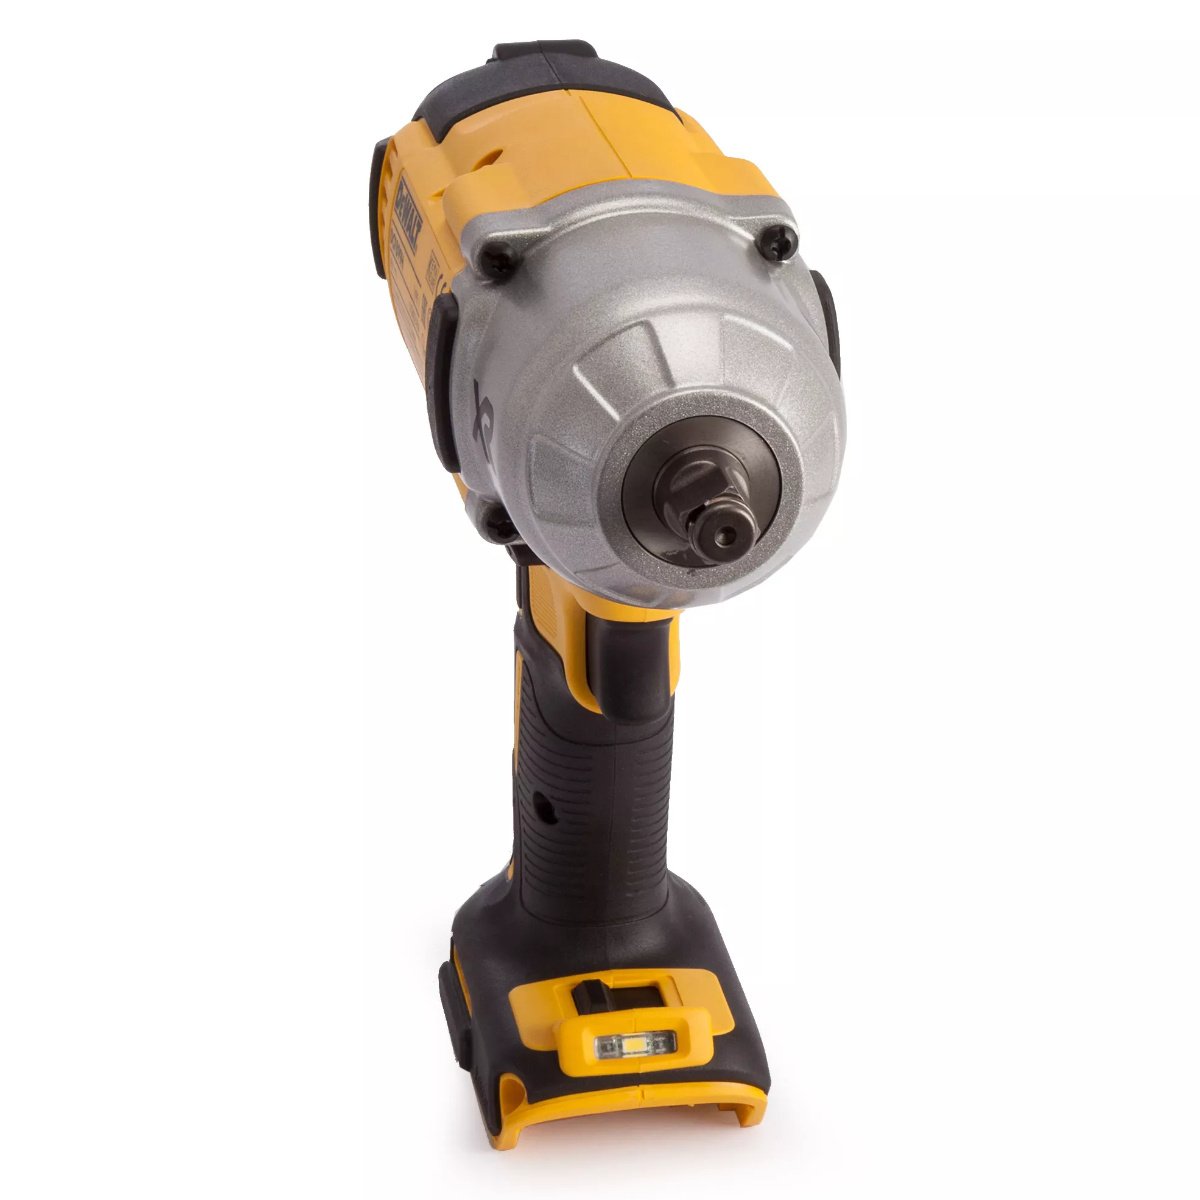 Dewalt High Torque 18V Impact Wrench 1/2" DCF899NT Power Tool Services